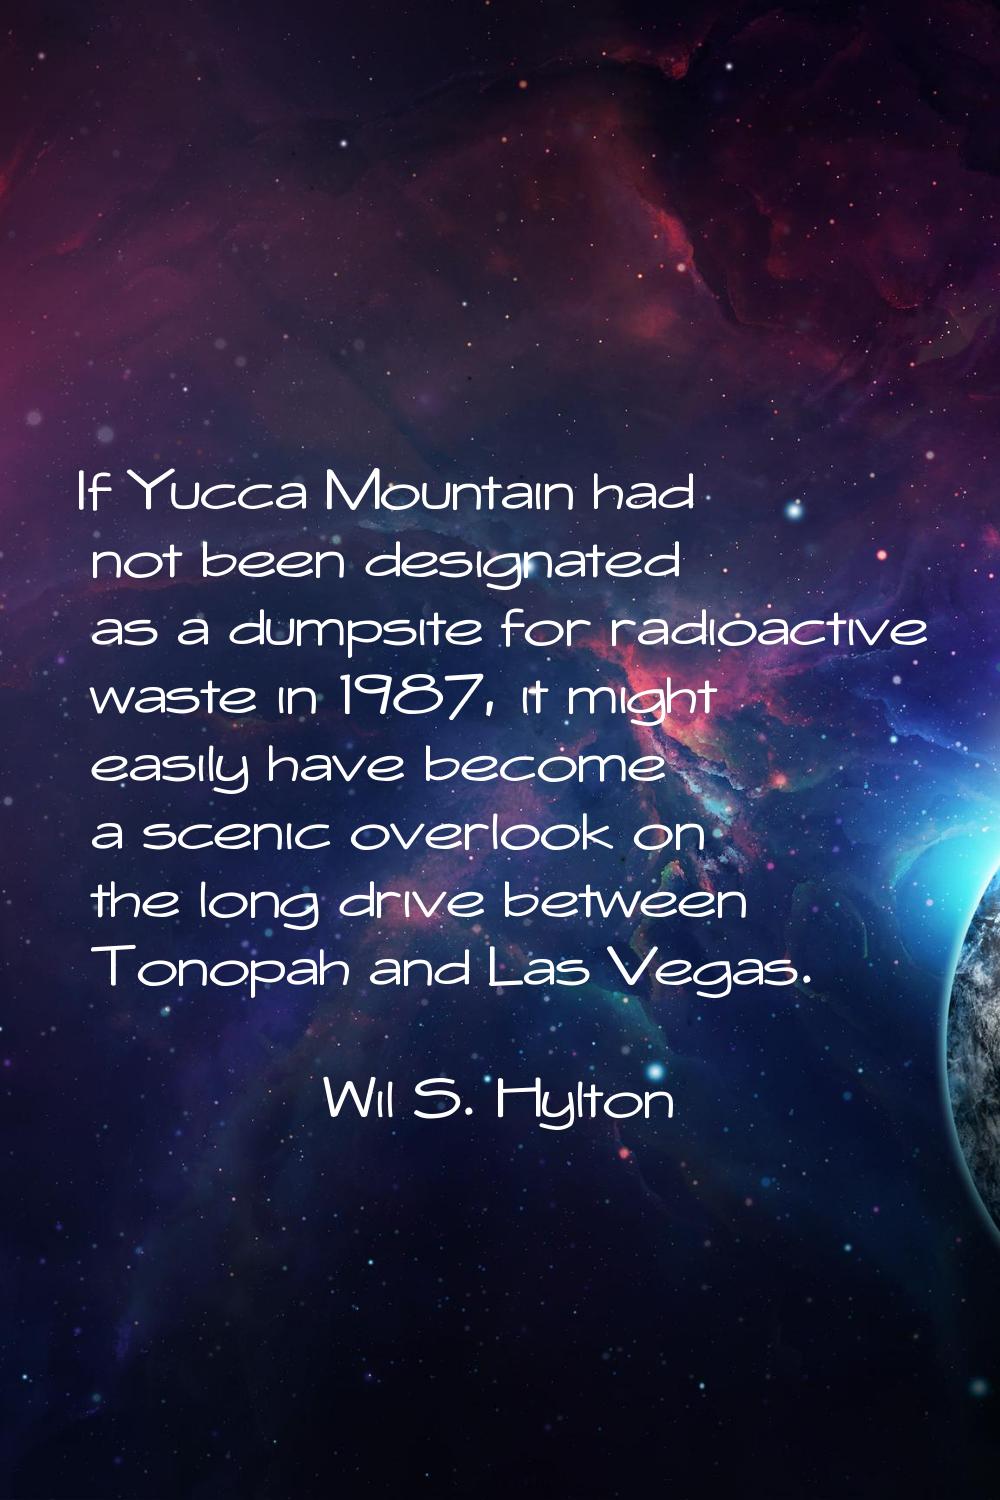 If Yucca Mountain had not been designated as a dumpsite for radioactive waste in 1987, it might eas